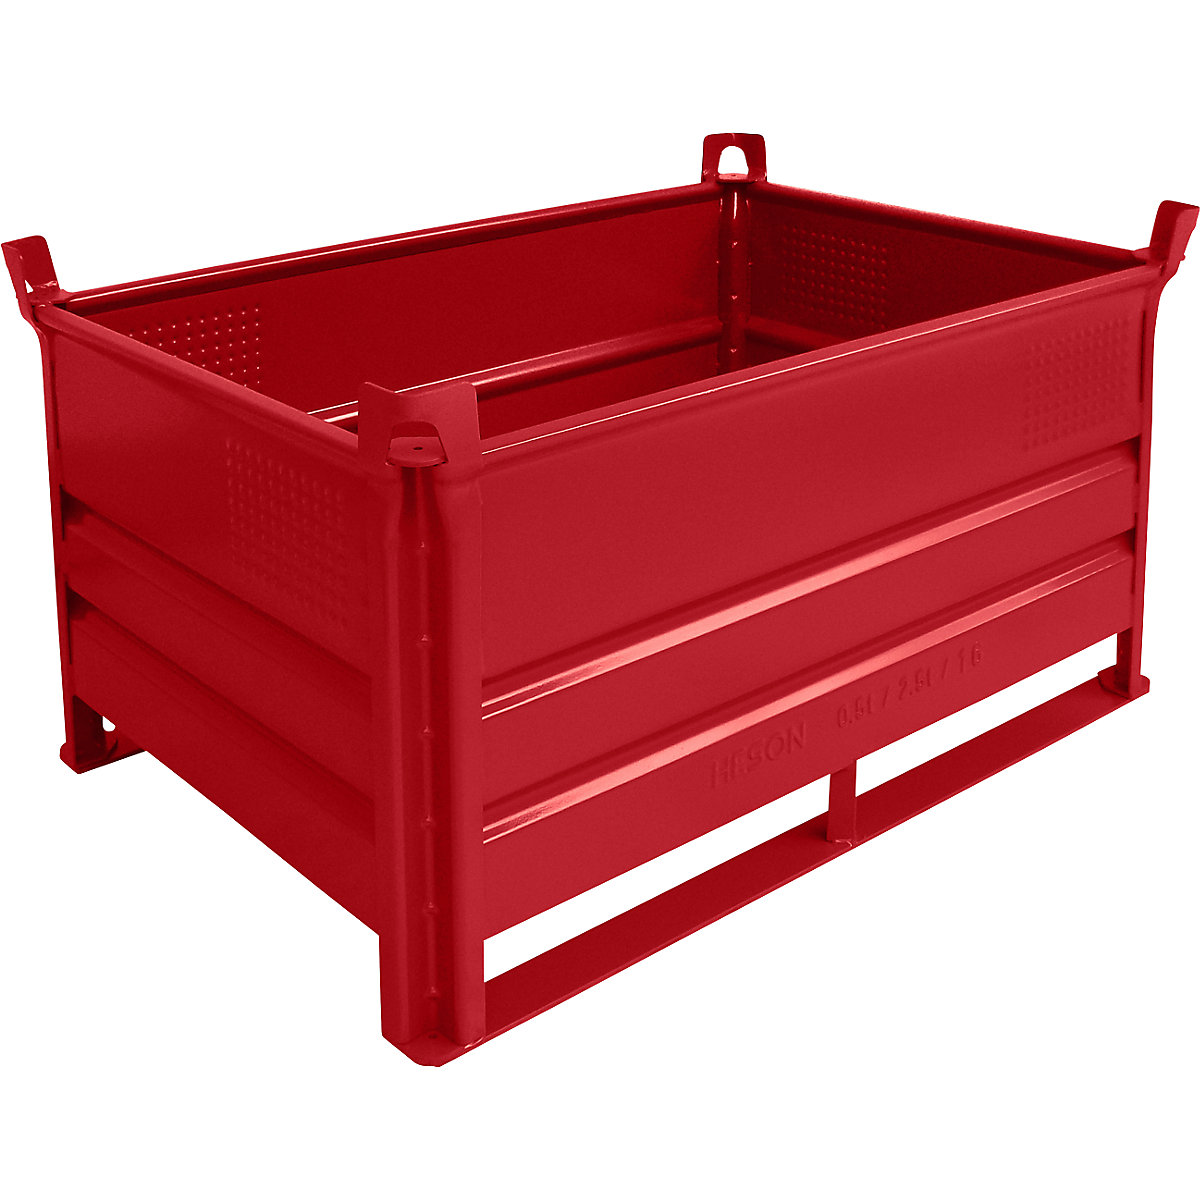 Stacking container with runners – Heson, LxW 1200 x 800 mm, max. load 2000 kg, red, 5+ items-3